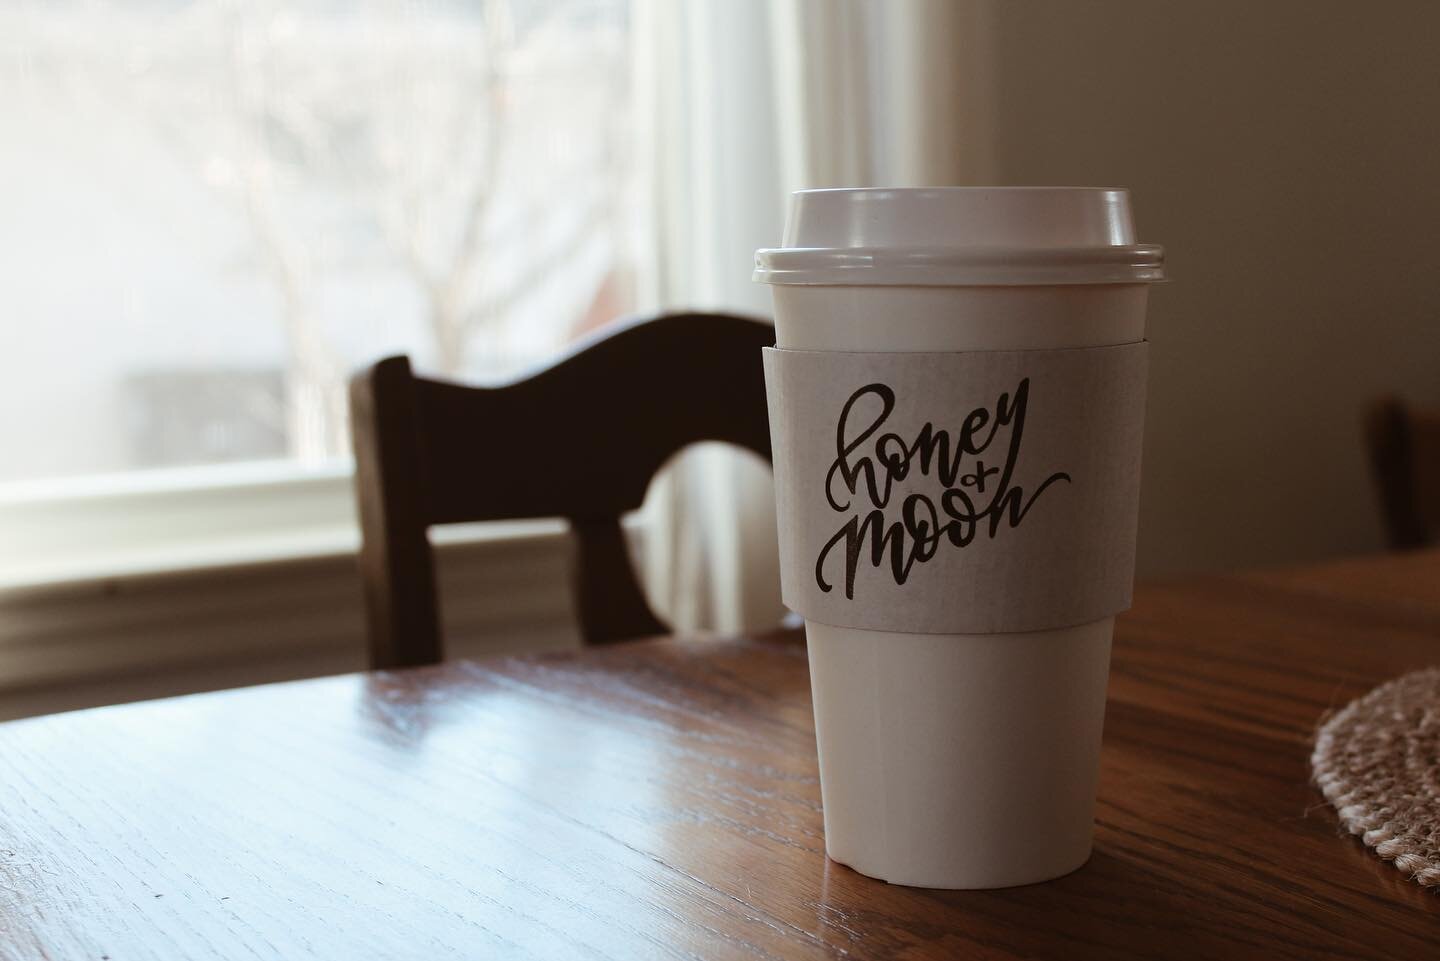 February&rsquo;s giveaway is brought to you by @honeymooncoffeeco ☕️ Honey Moon is Evansville&rsquo;s best coffee! They have graciously offered to give one $20 gift card to one blessed follower! If you&rsquo;re out of town, don&rsquo;t fret, they&rsq